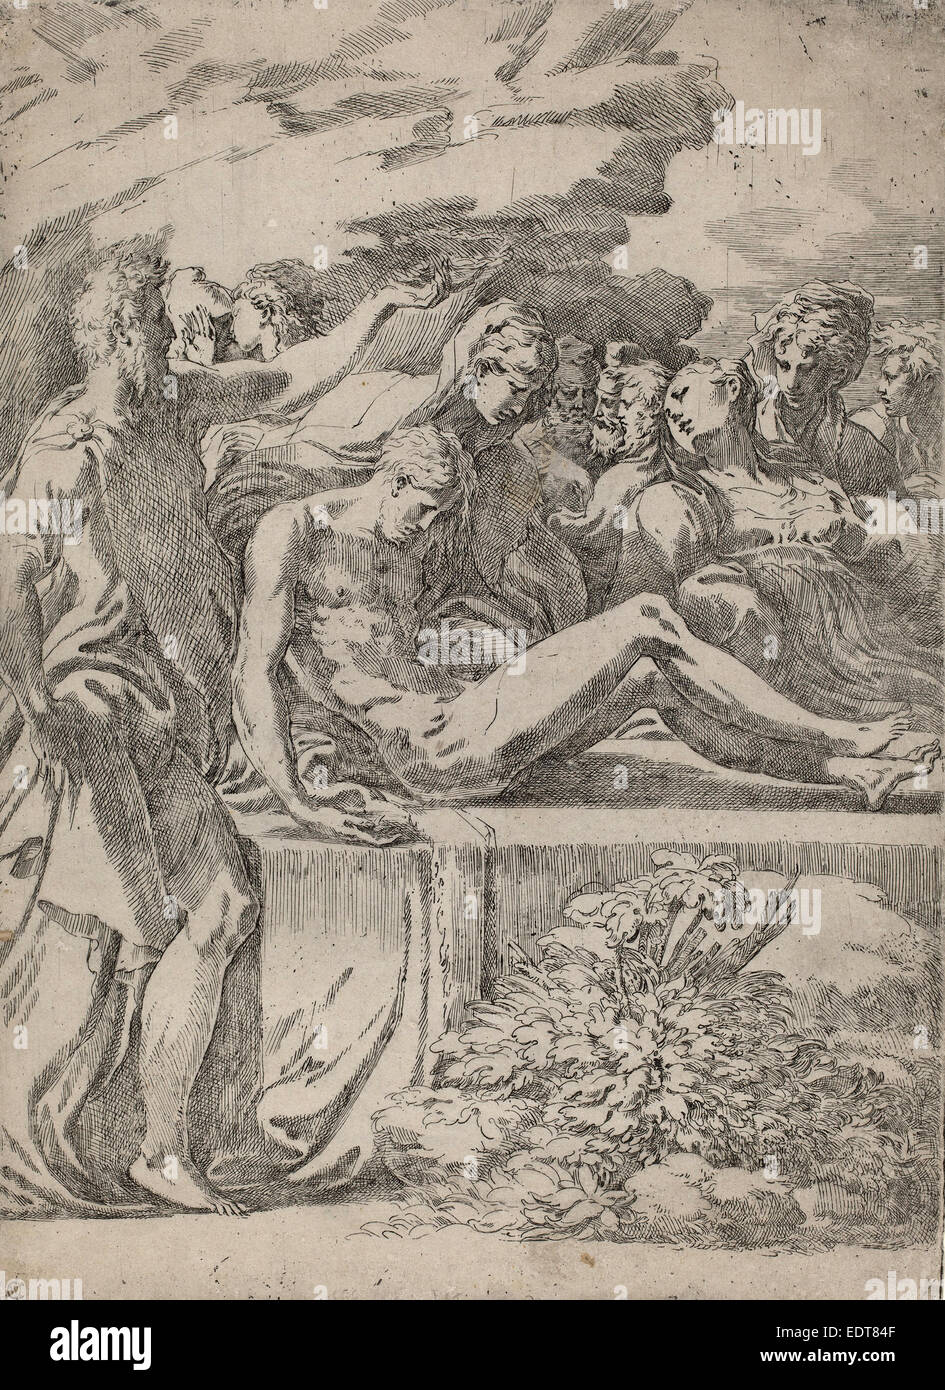 Parmigianino (Italian, 1503 - 1540), The Entombment, c. 1530, etching and drypoint Stock Photo